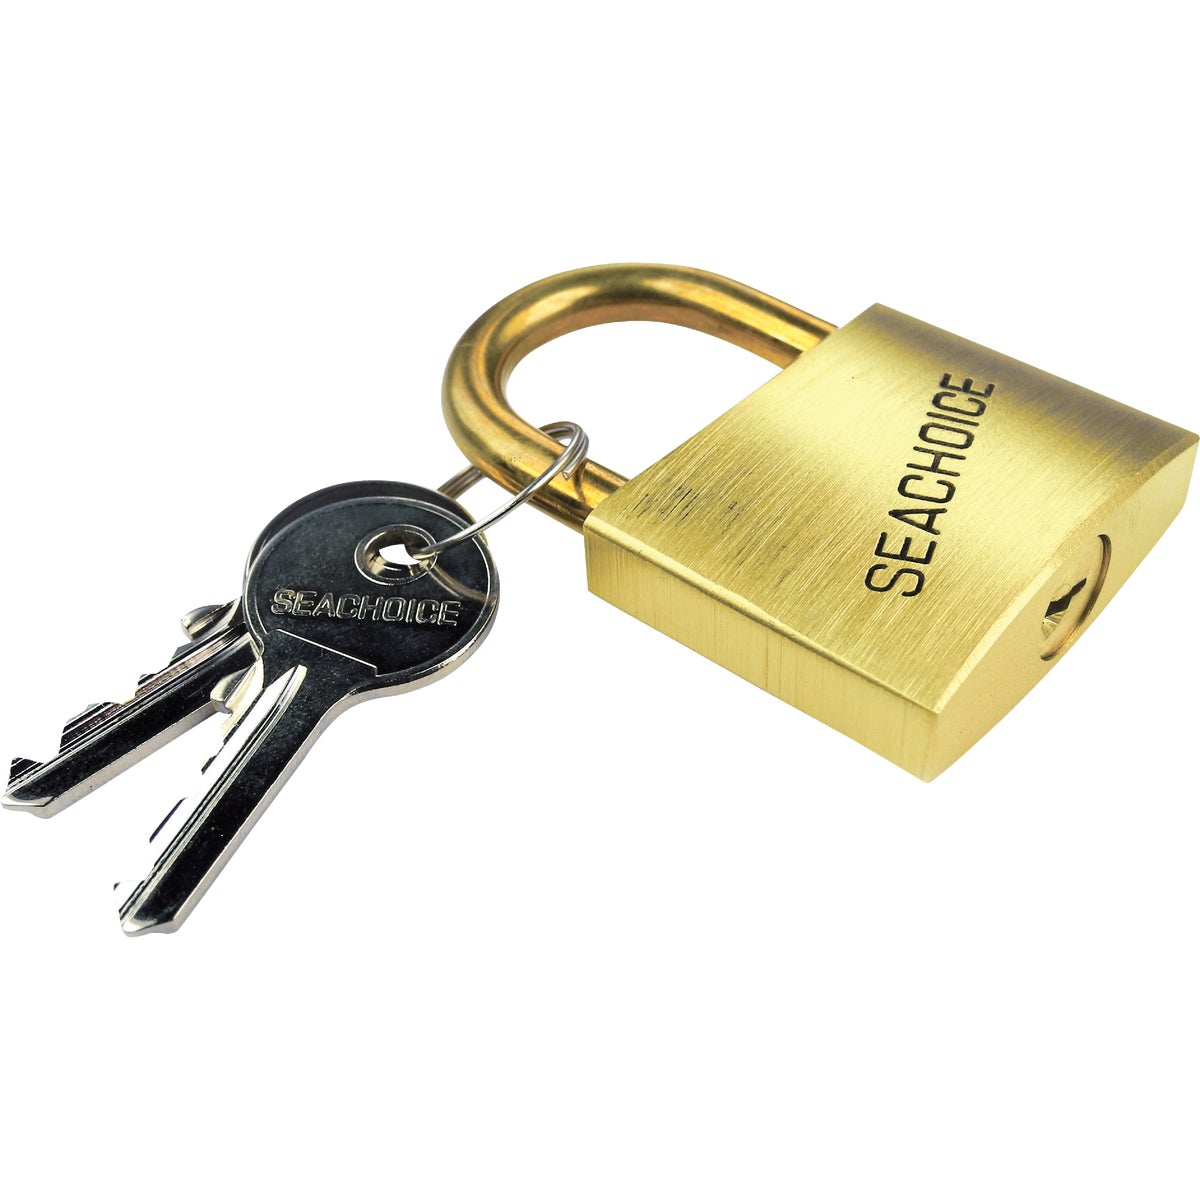 Item 571955, Solid brass body and hasp padlock with 2 nickel-plated brass keys